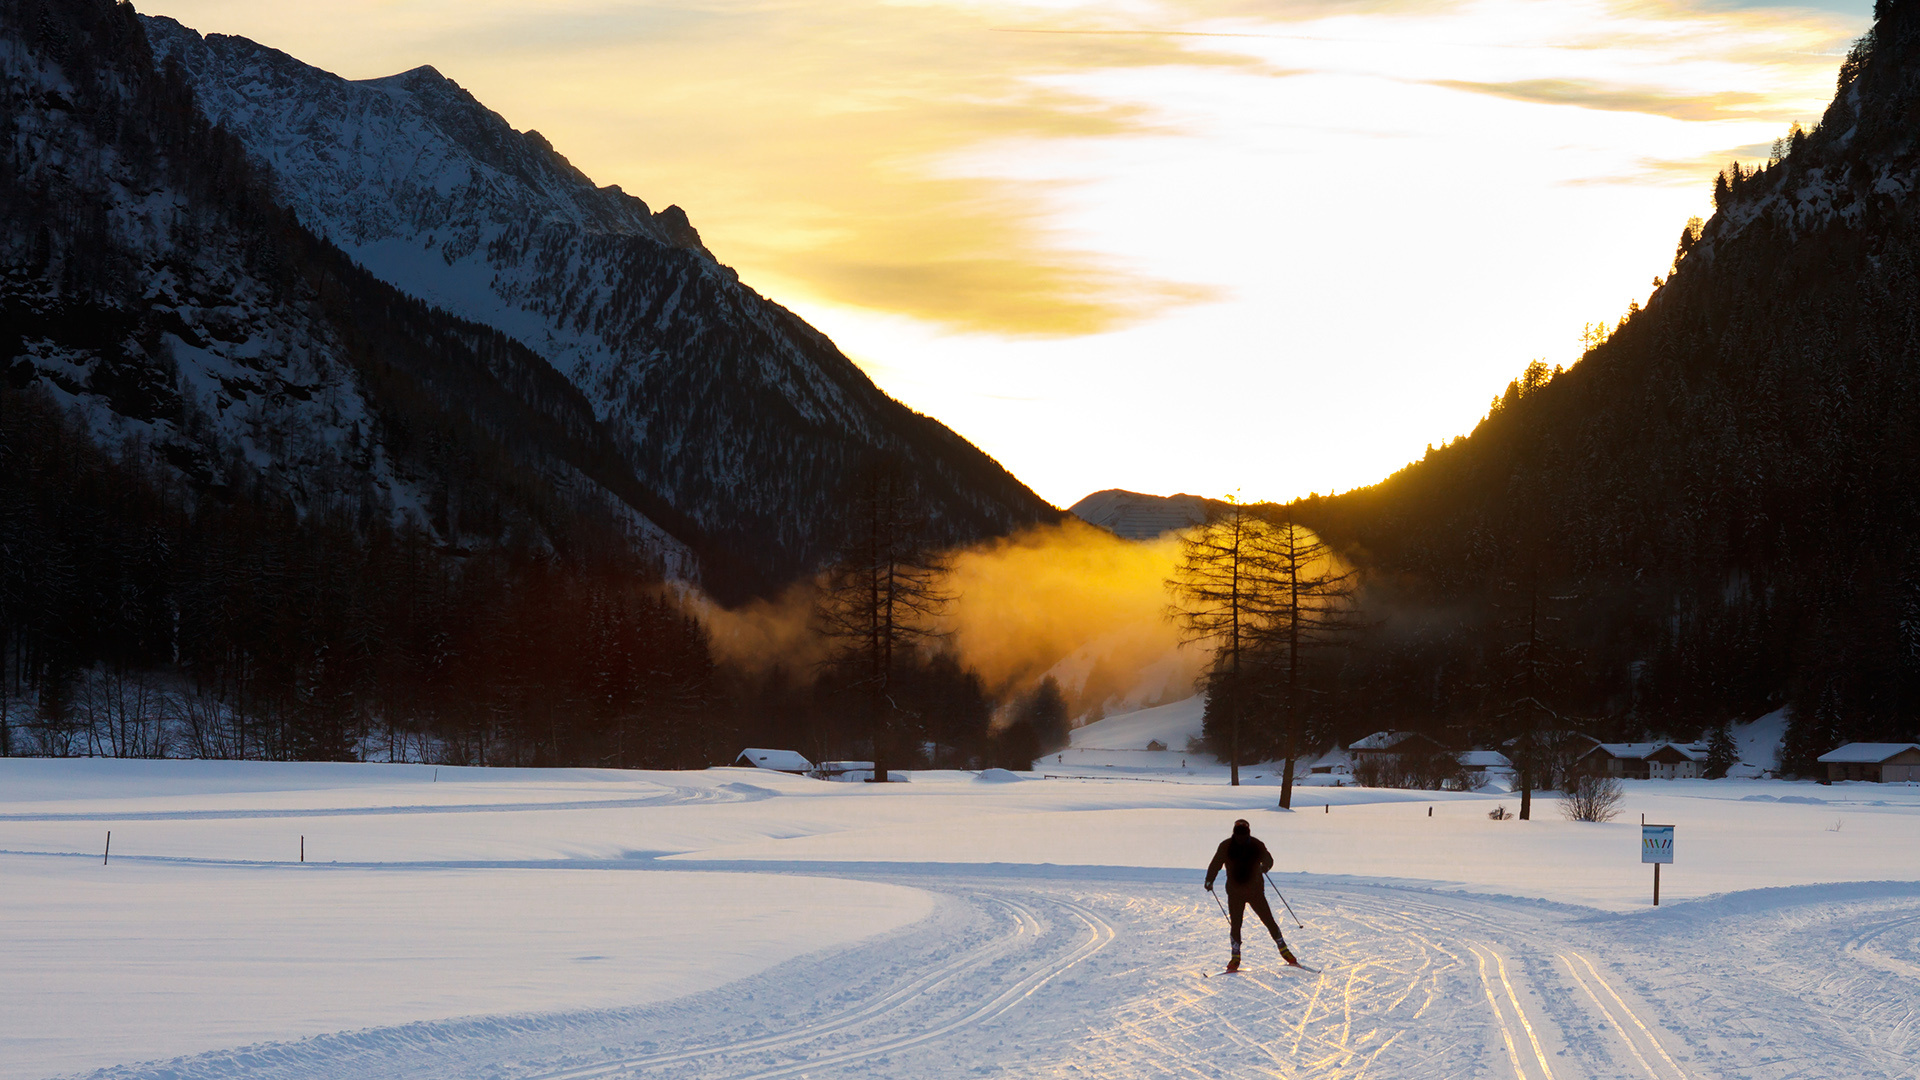 Cross-country skiing, Sunset in the Alps, South Tyrol, Italy, 1920x1080 Full HD Desktop